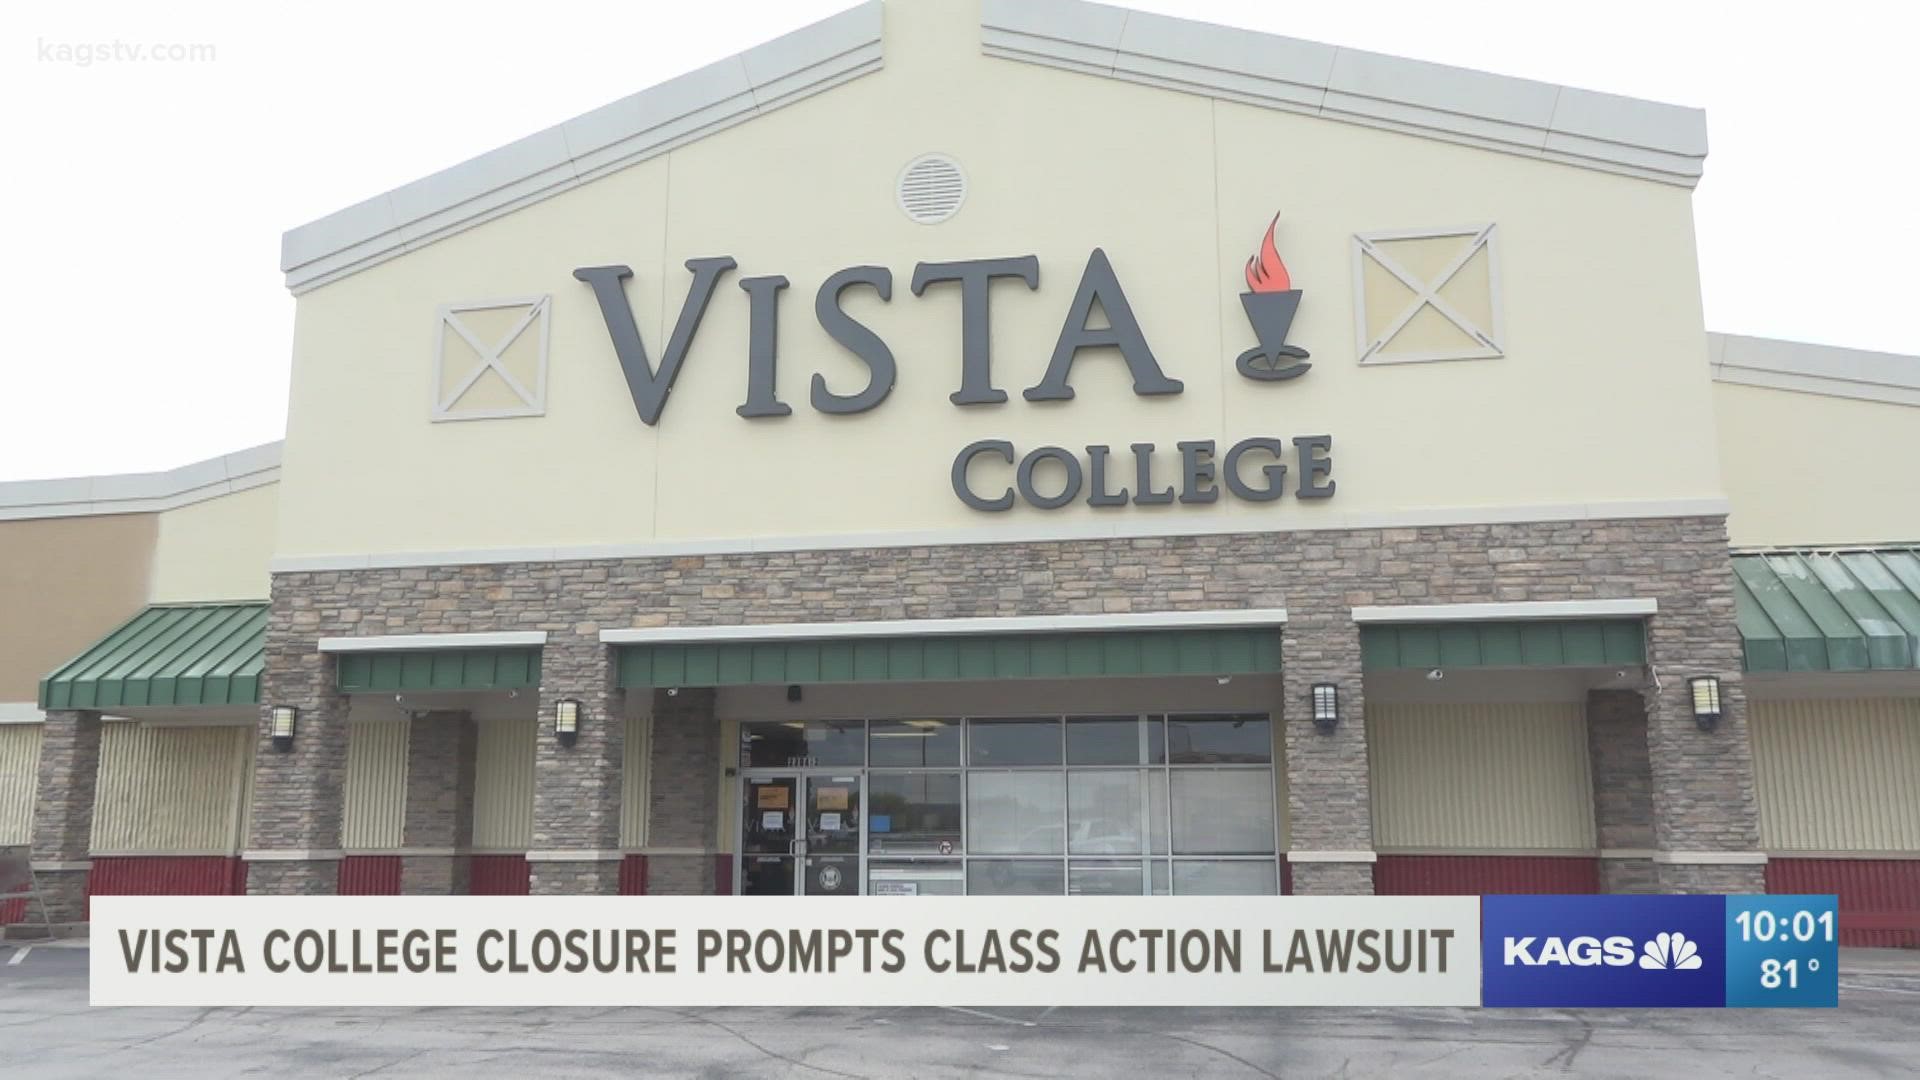 A lawyer representing the case said nearly 50 former students have joined the lawsuit and there could be more pending.